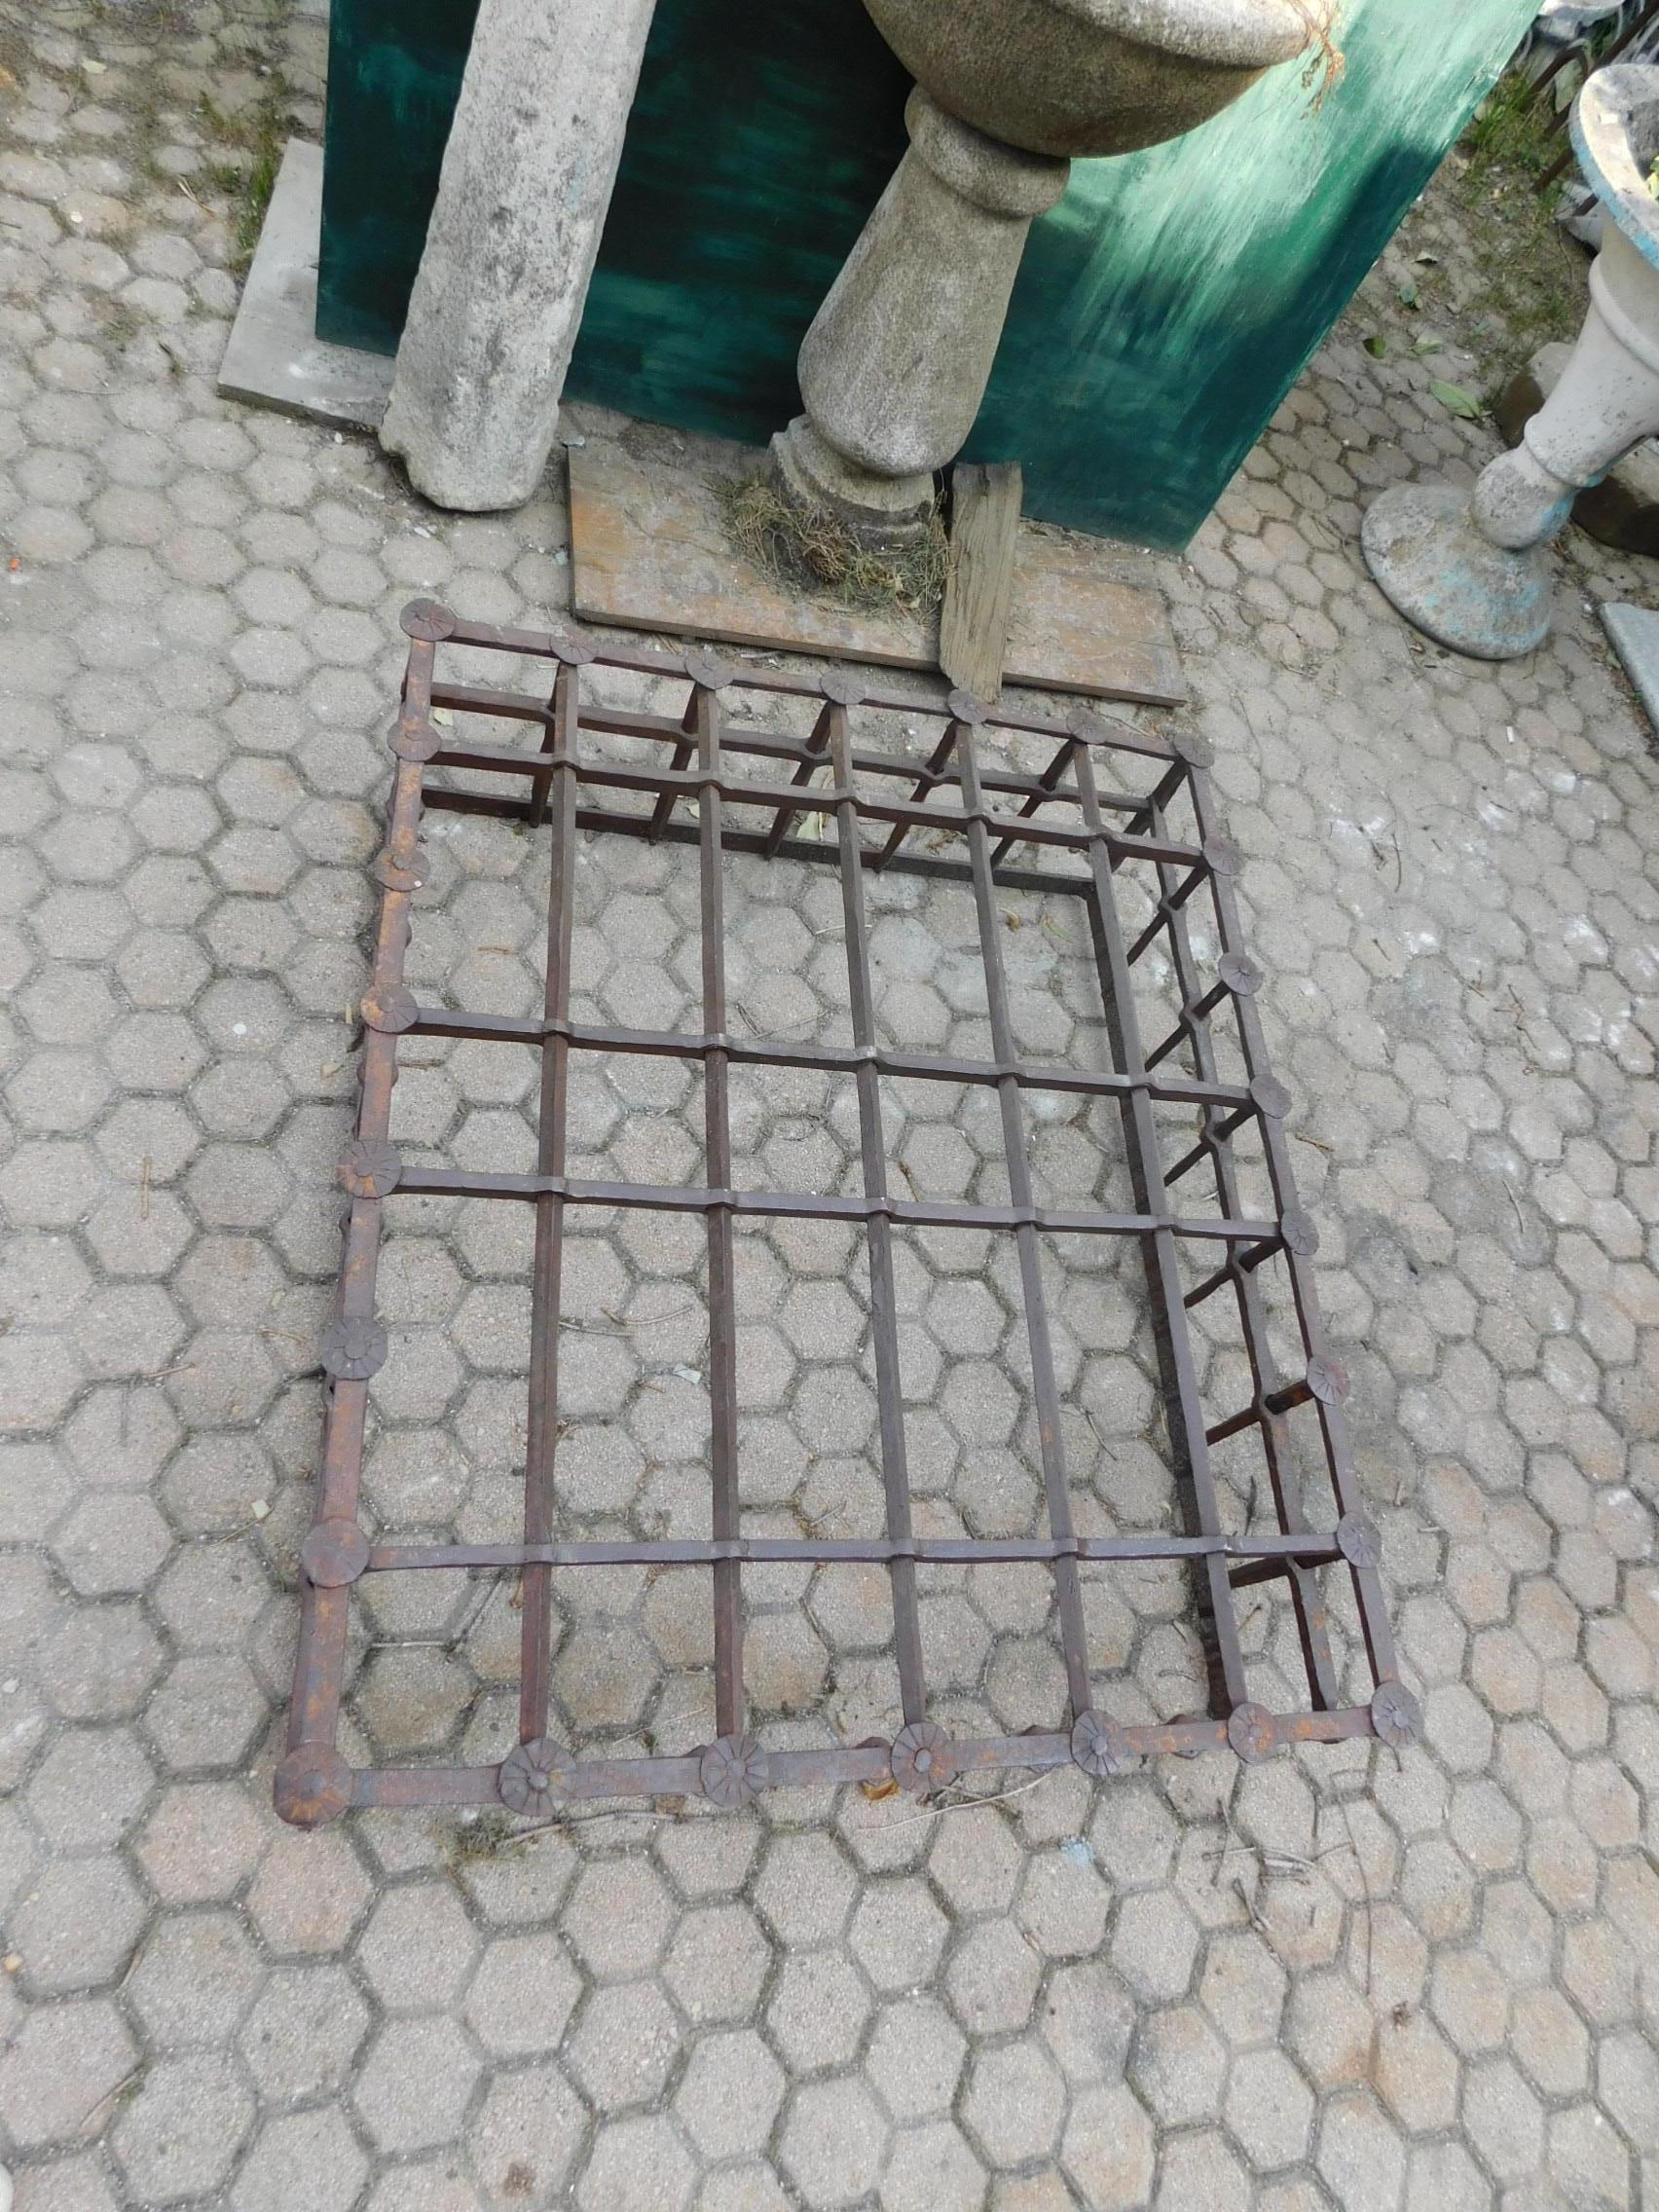 Antique iron grate for window, exhumed from a noble palace in Venice, 17th century, today can be used as a coffee table with glass on it or as a decoration for a luxurious interior, also suitable in the garden, as a base table for climbing plants or